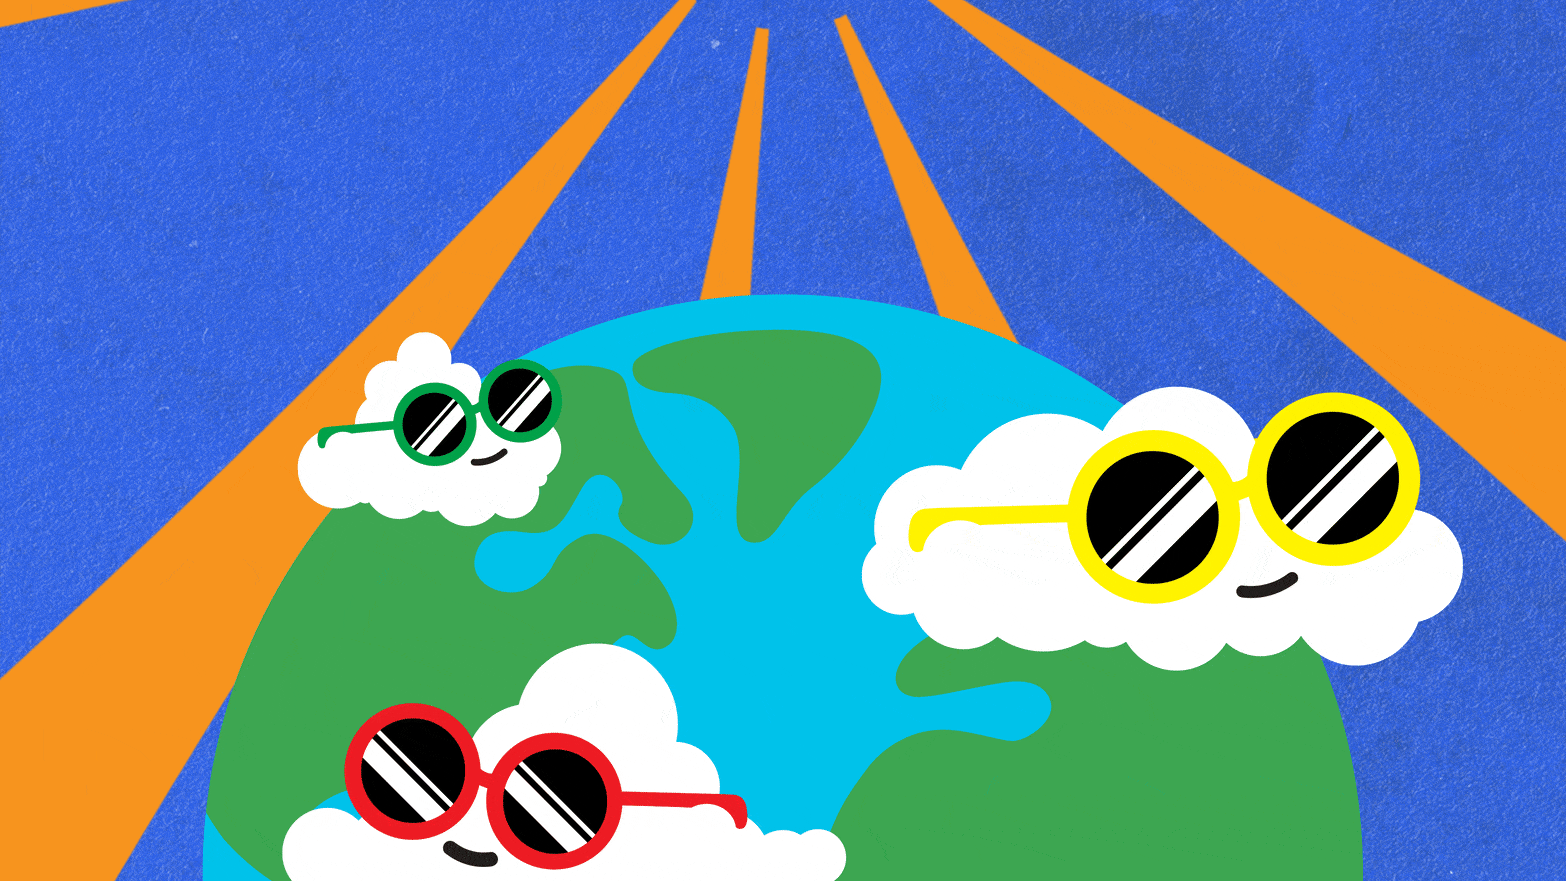 A gif of an illustration that shows sun rays beating down on clouds wearing sunglasses as they float over the Earth